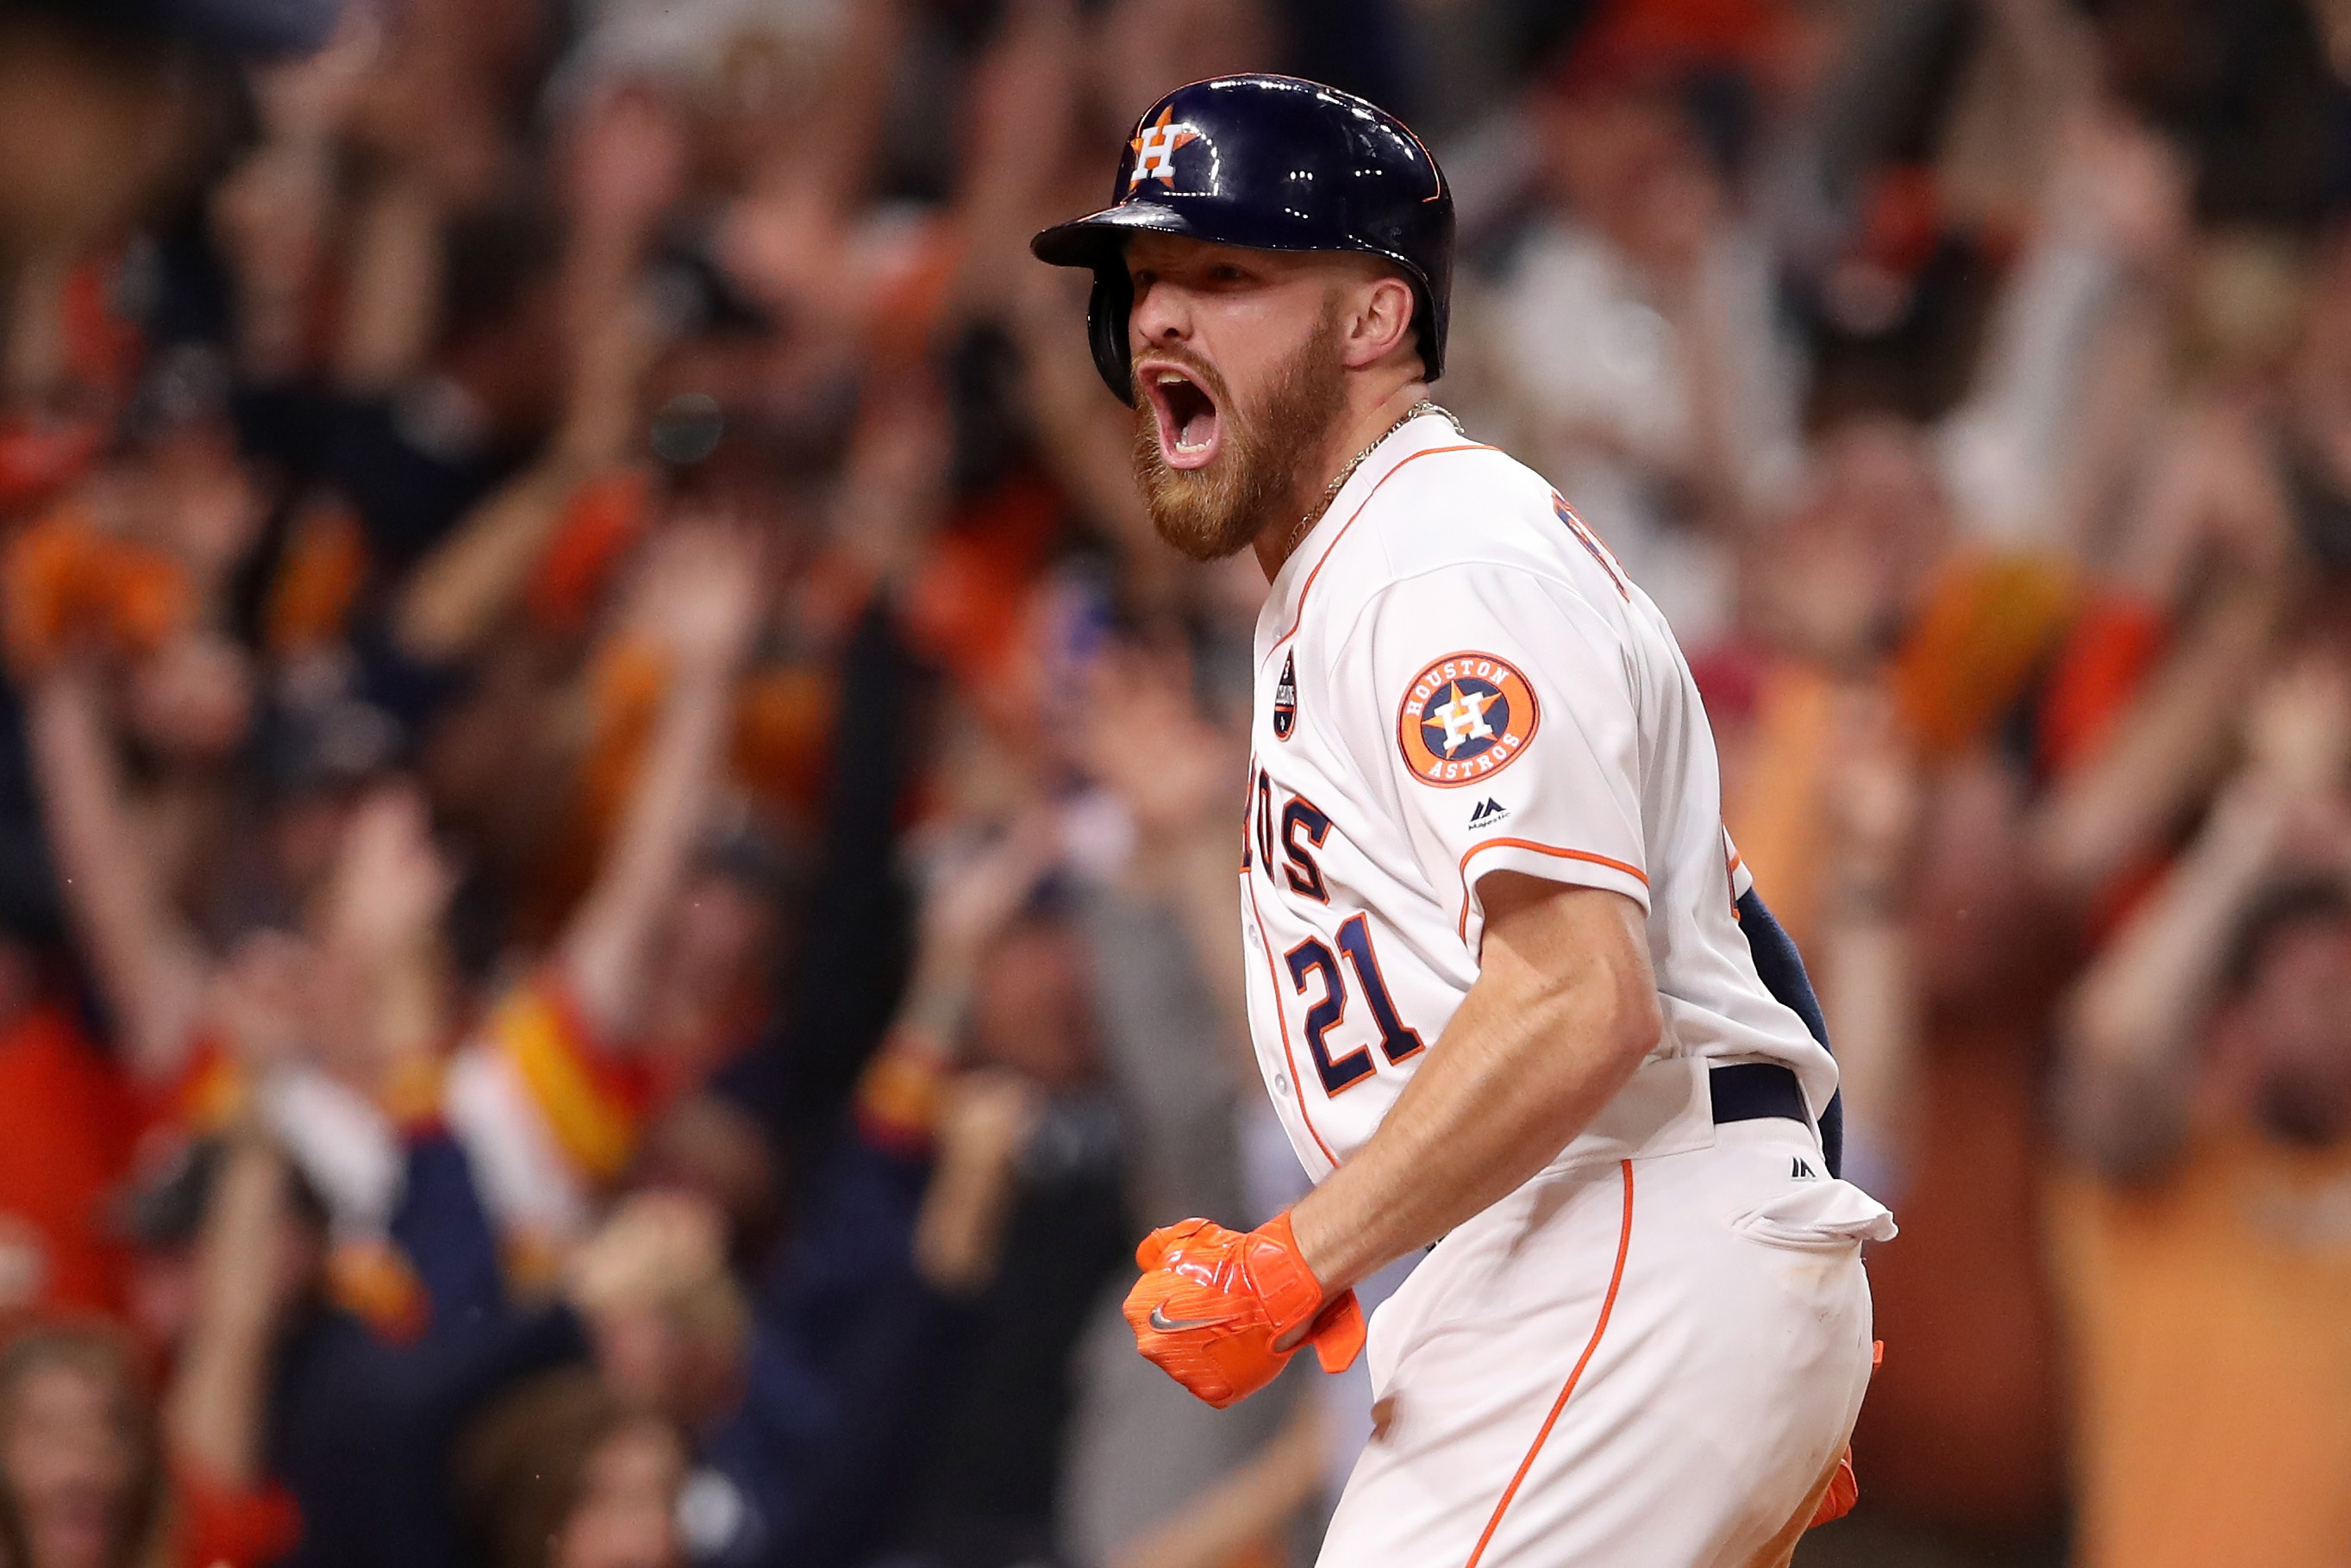 Alex Bregman, Houston Astros Go For Second World Series - And The Valley  Shook